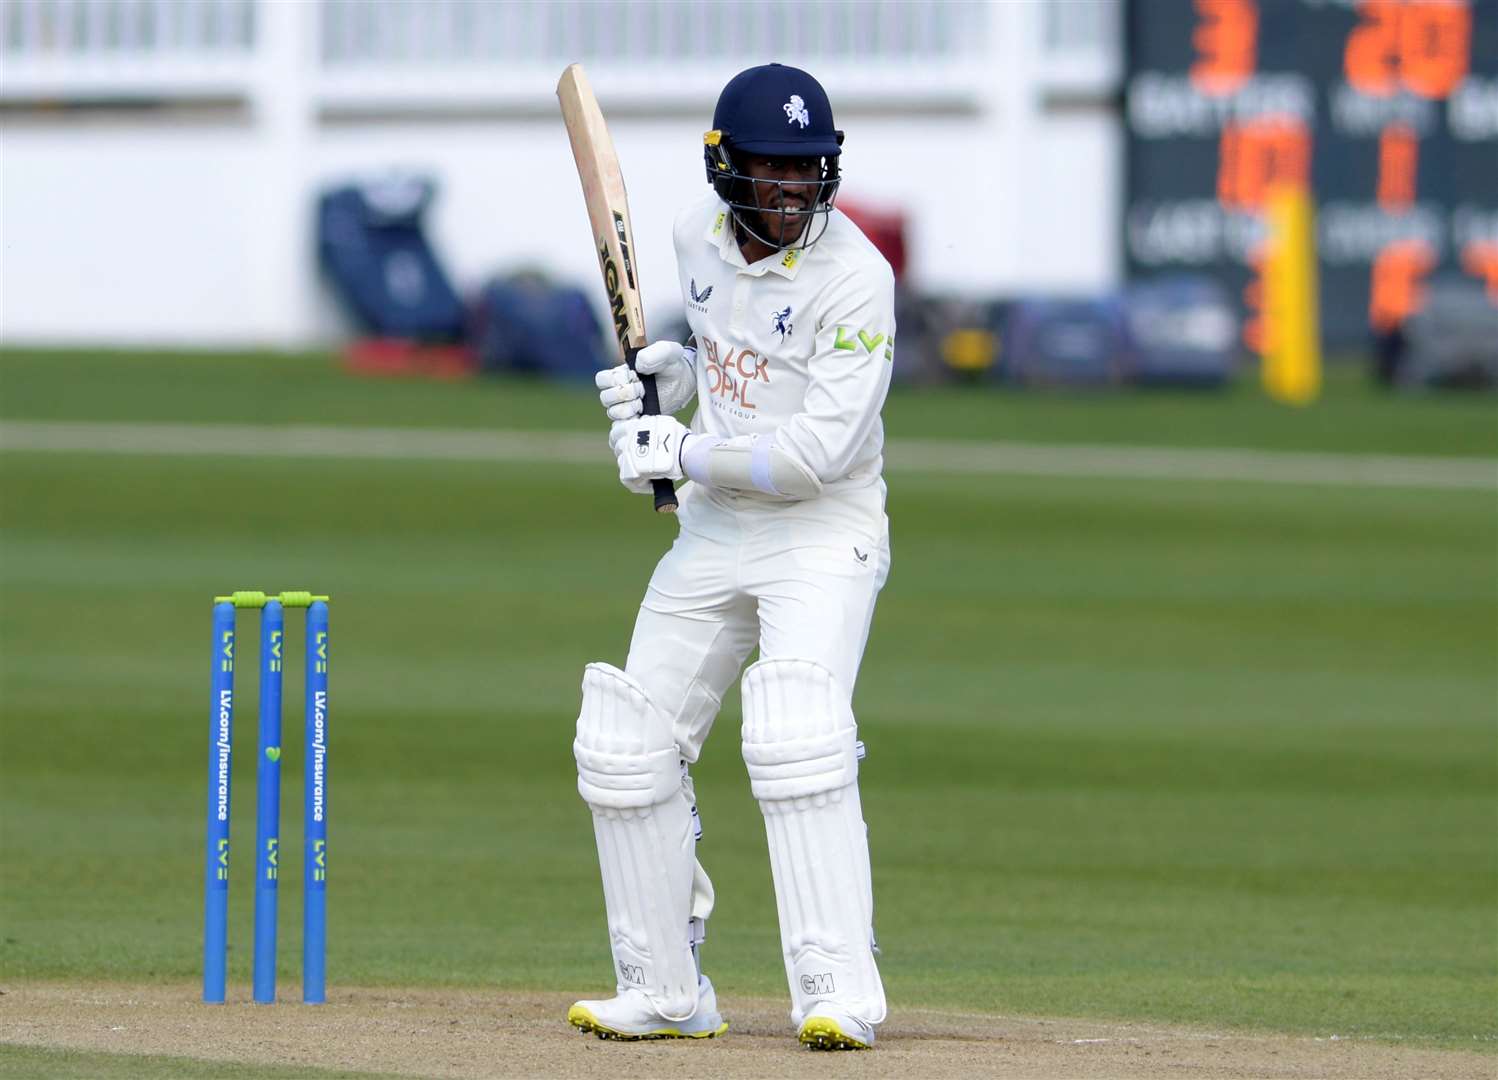 Daniel Bell-Drummond scored 300 not out at Northamptonshire in County Championship Division 1 during a stunning run of form in June. Picture: Barry Goodwin